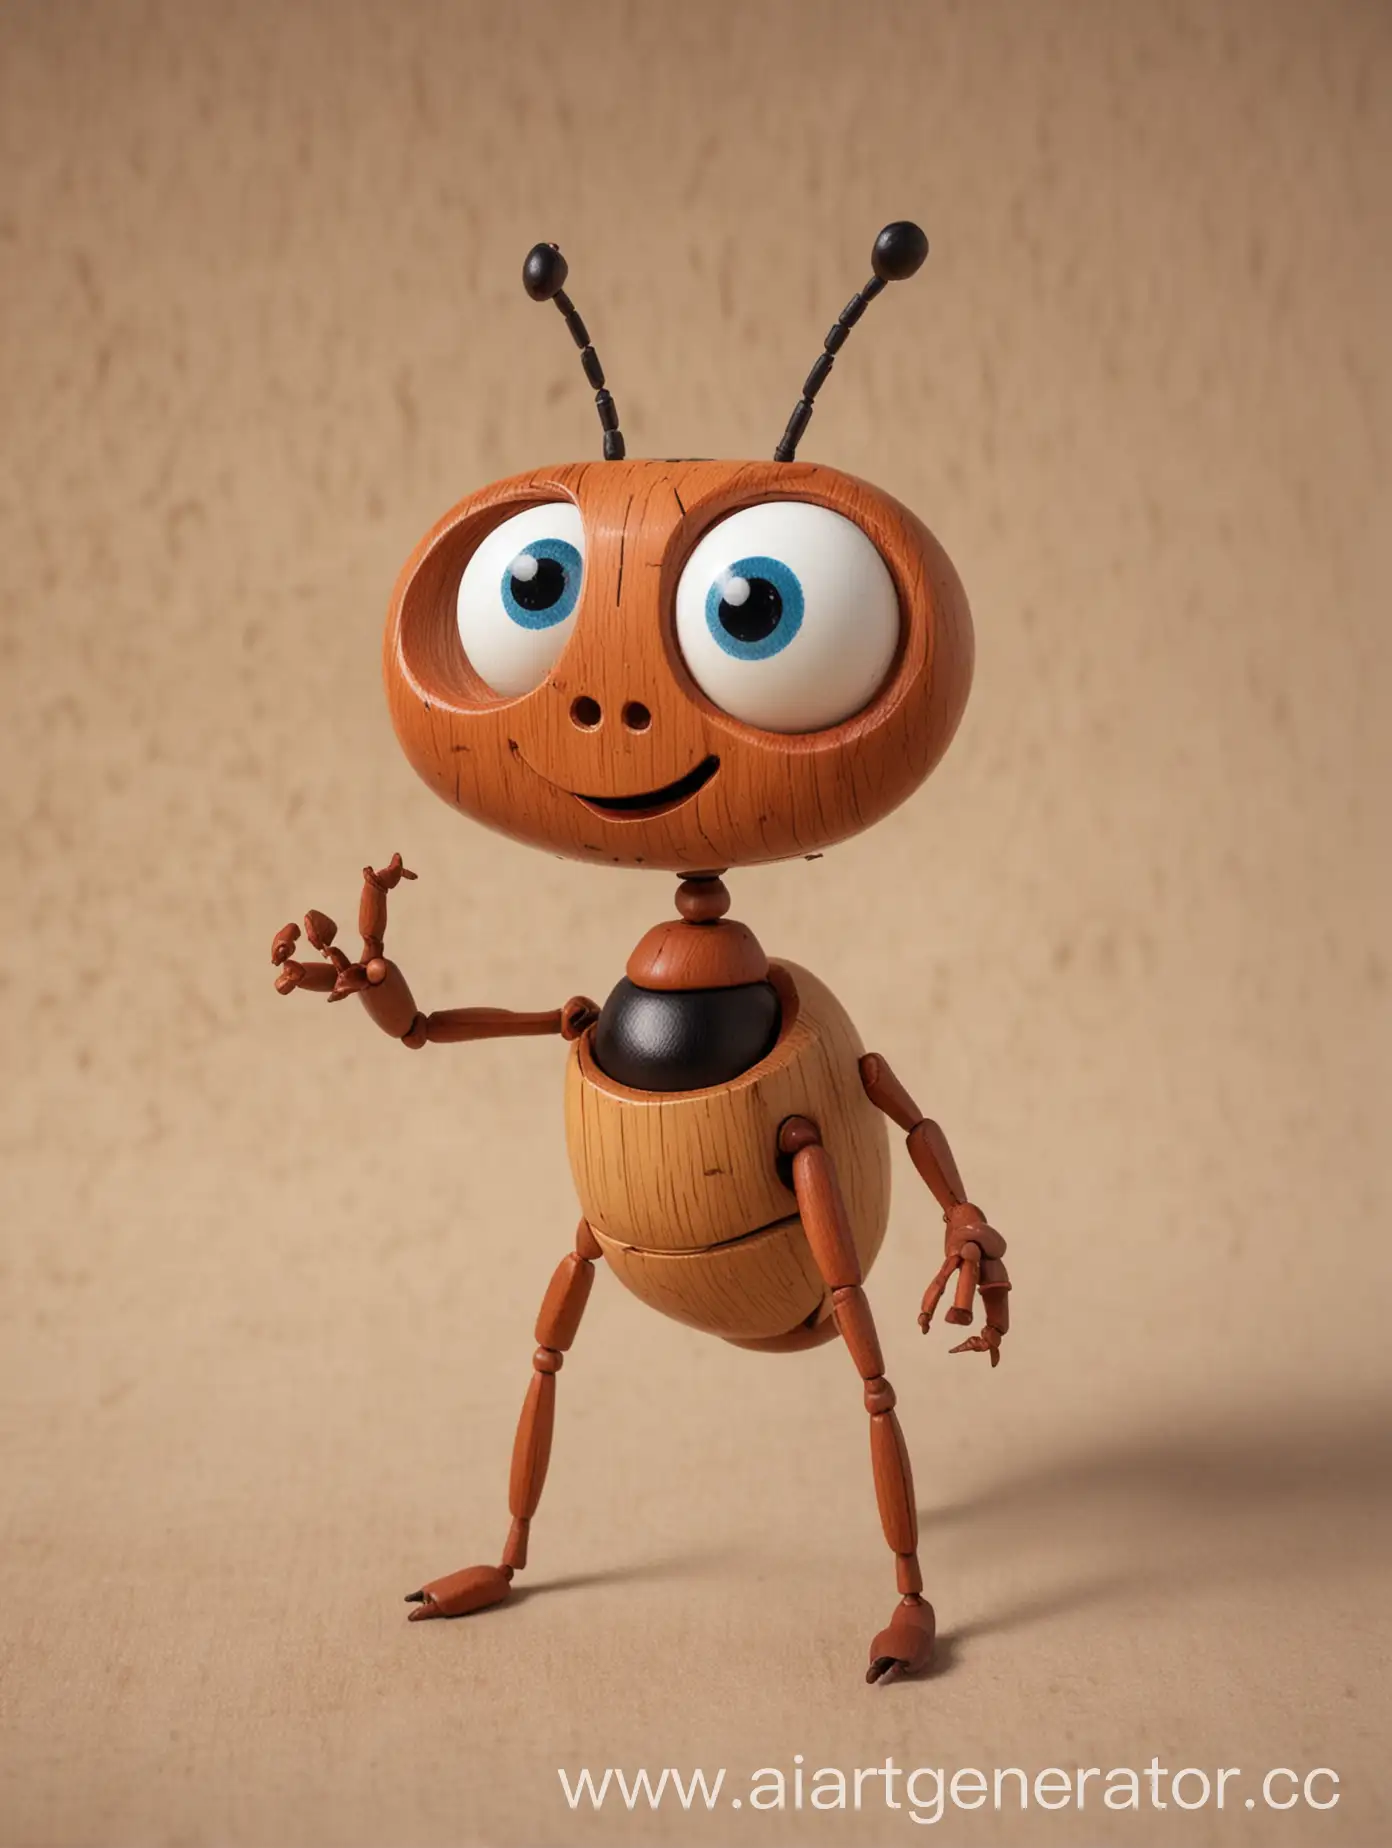 Whimsical-Toy-Wooden-Ant-Inspired-by-Toy-Story